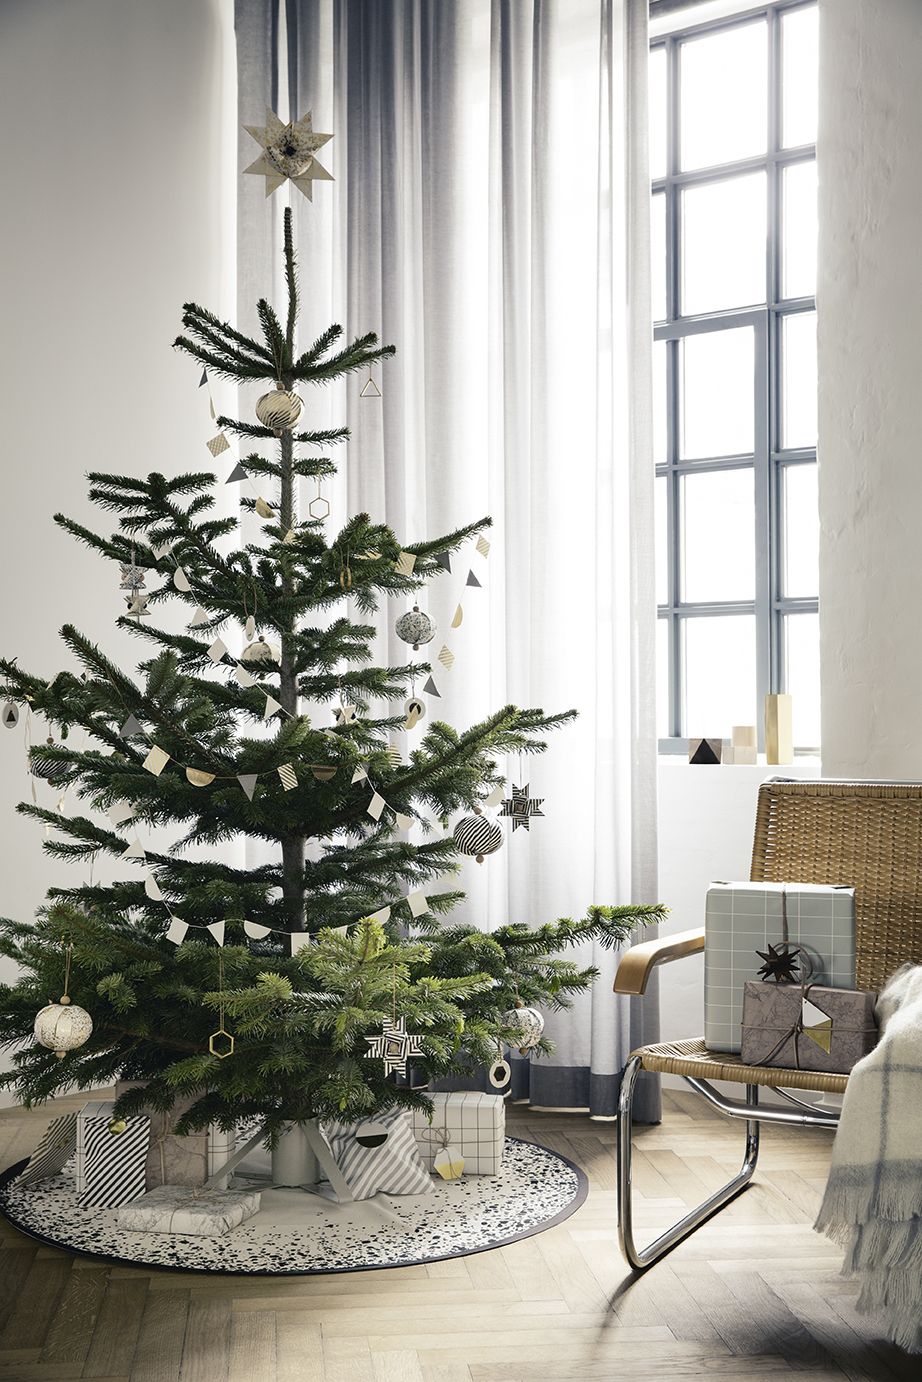 How to decorate a Scandinavian Christmas tree?